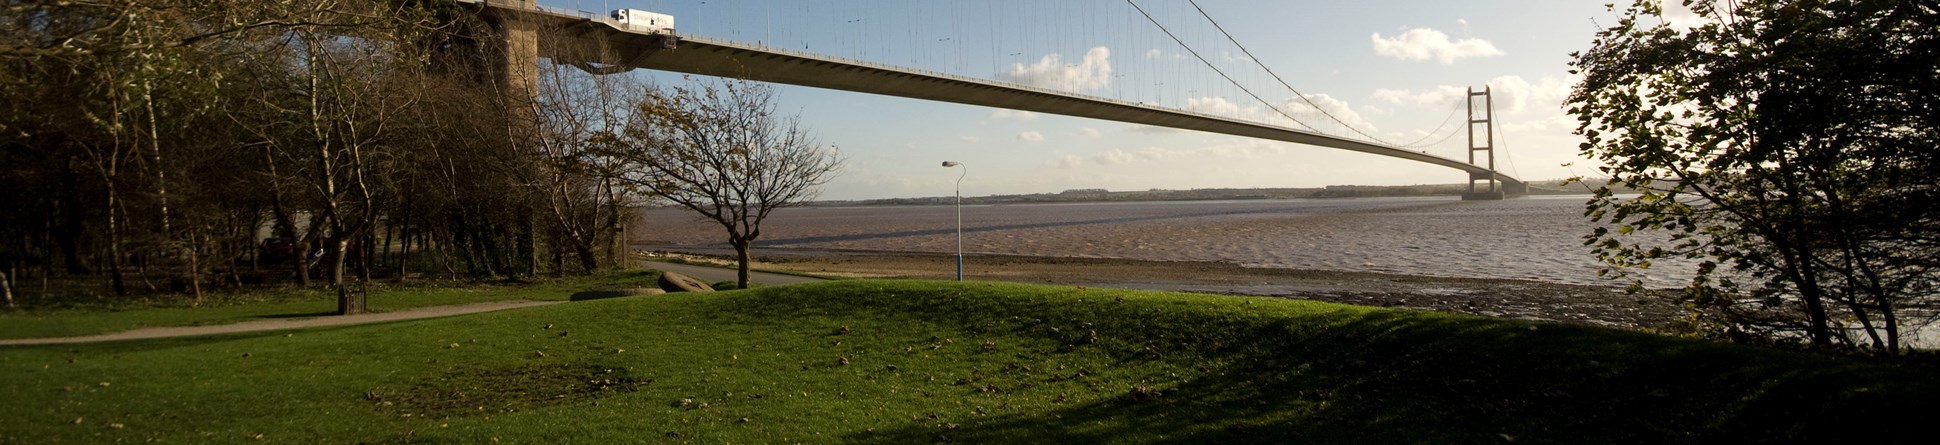 The Humber bridge is now Grade I listed